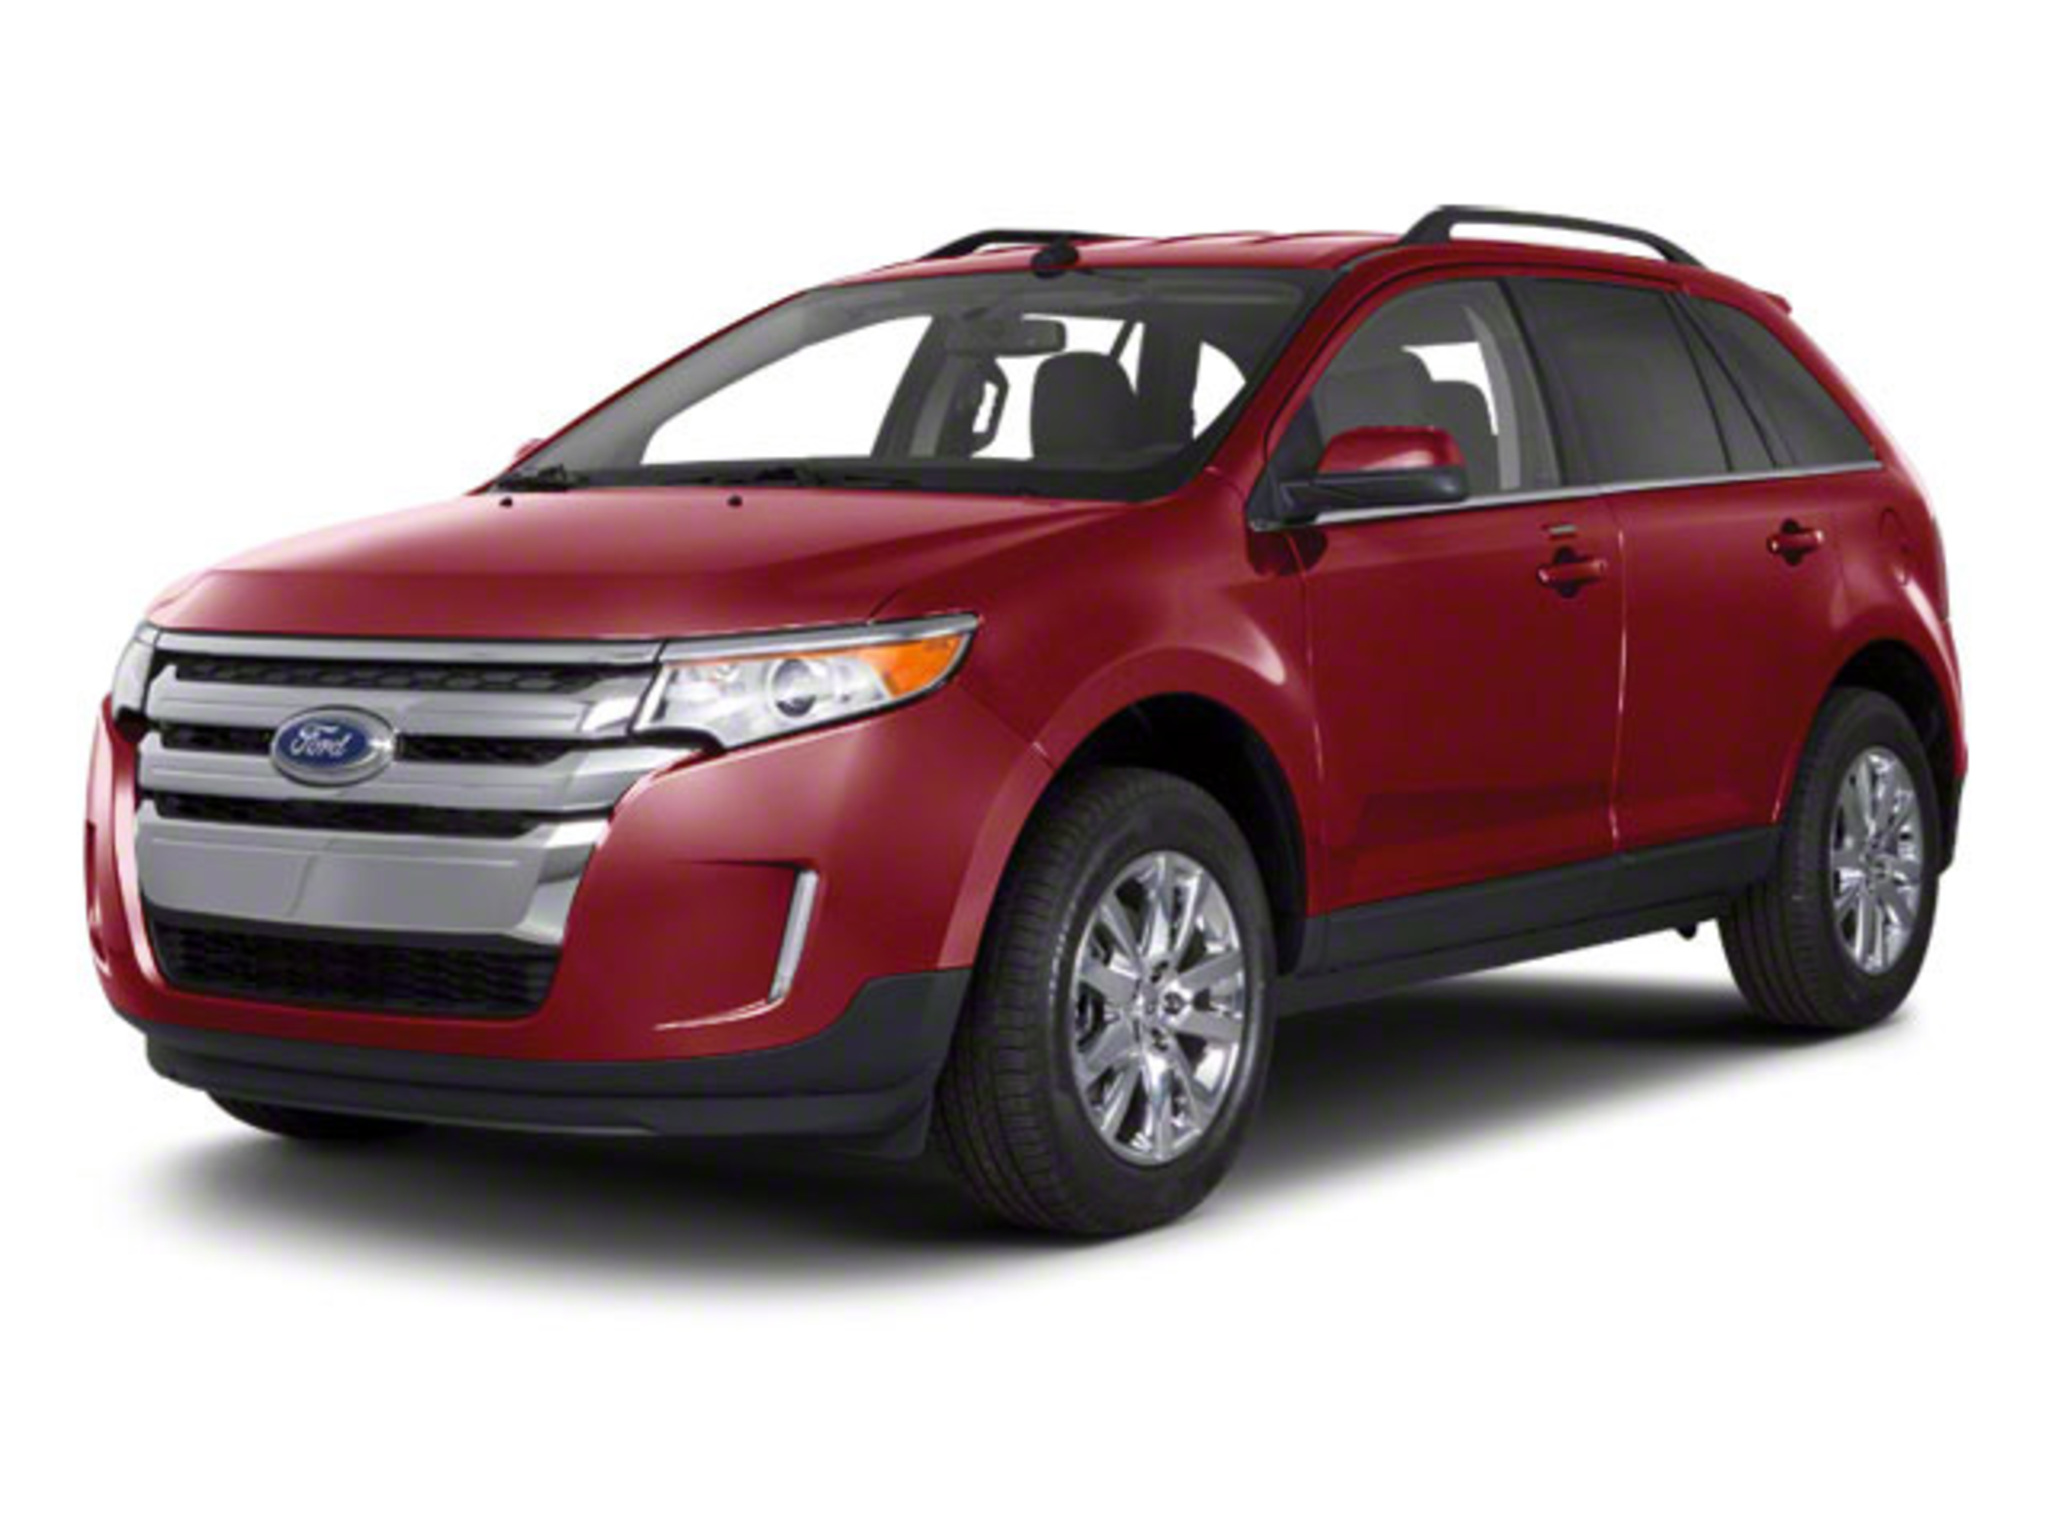 2012 Ford Edge - Prices, Trims, Options, Specs, Photos, Reviews, Deals | autoTRADER.ca 2017 Ford Edge Tire Size P245 60r18 Se Sel